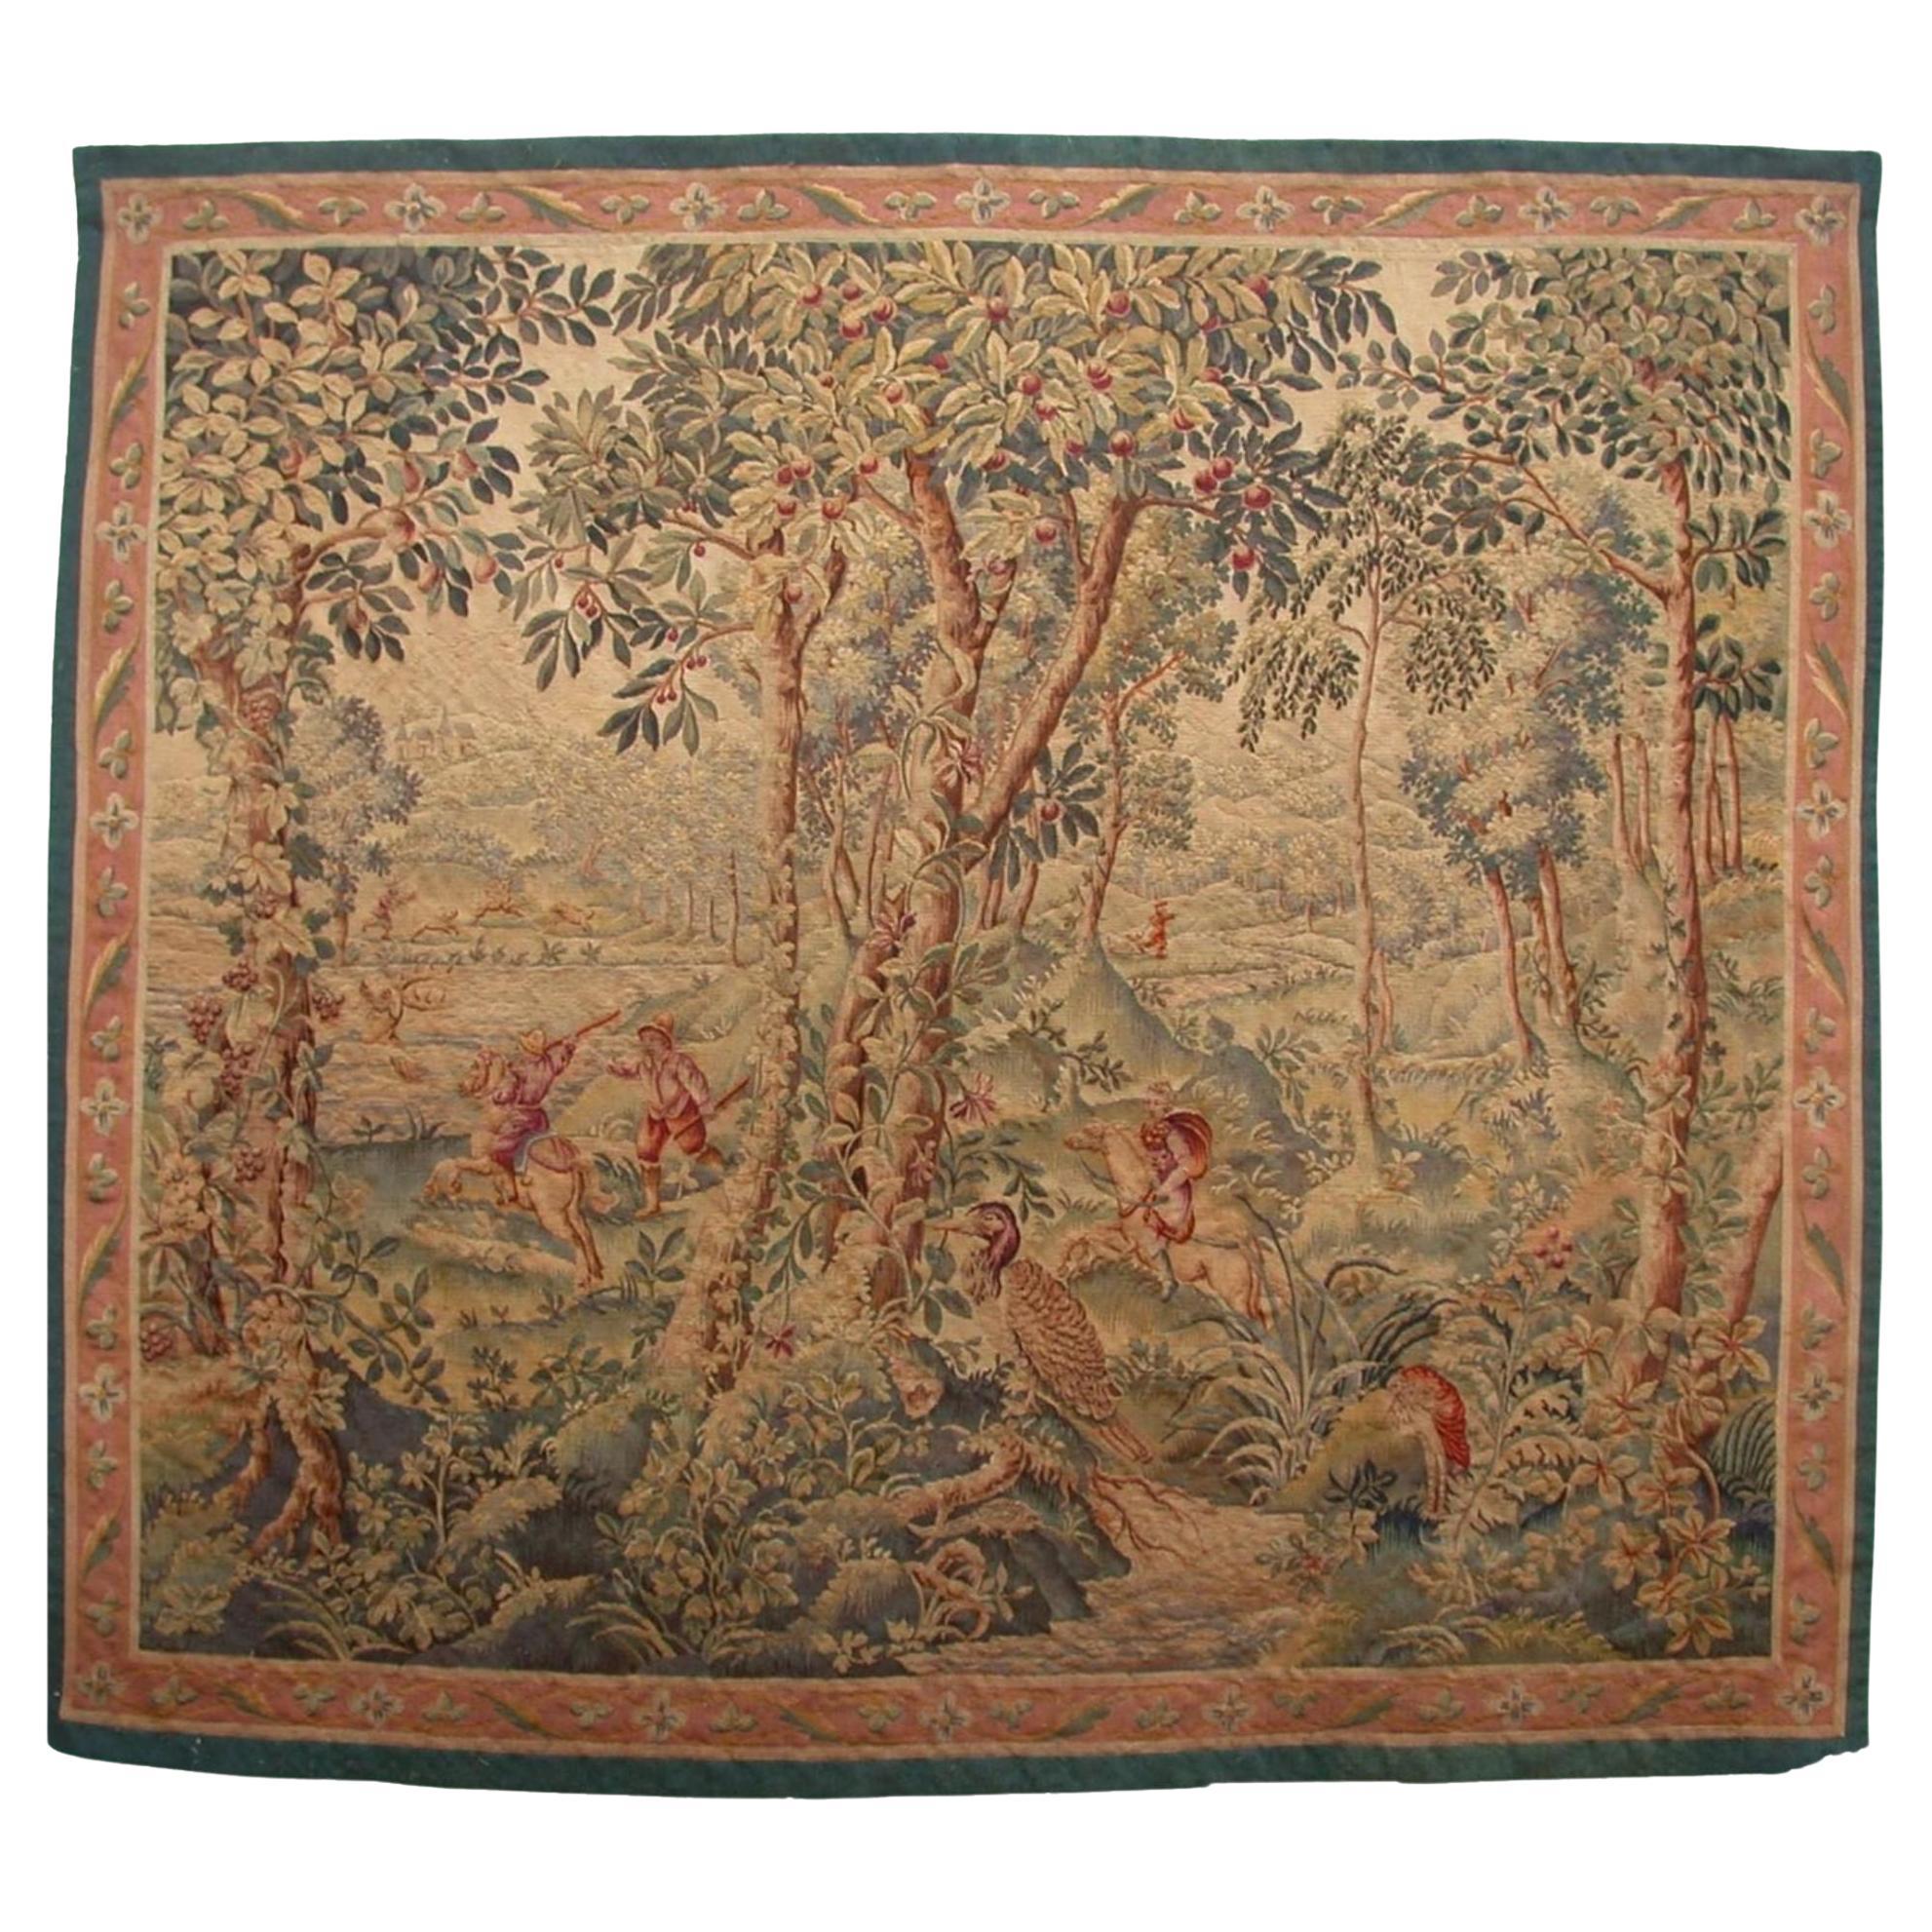 Antique 1900 French Tapestry 5'7" X 5' For Sale